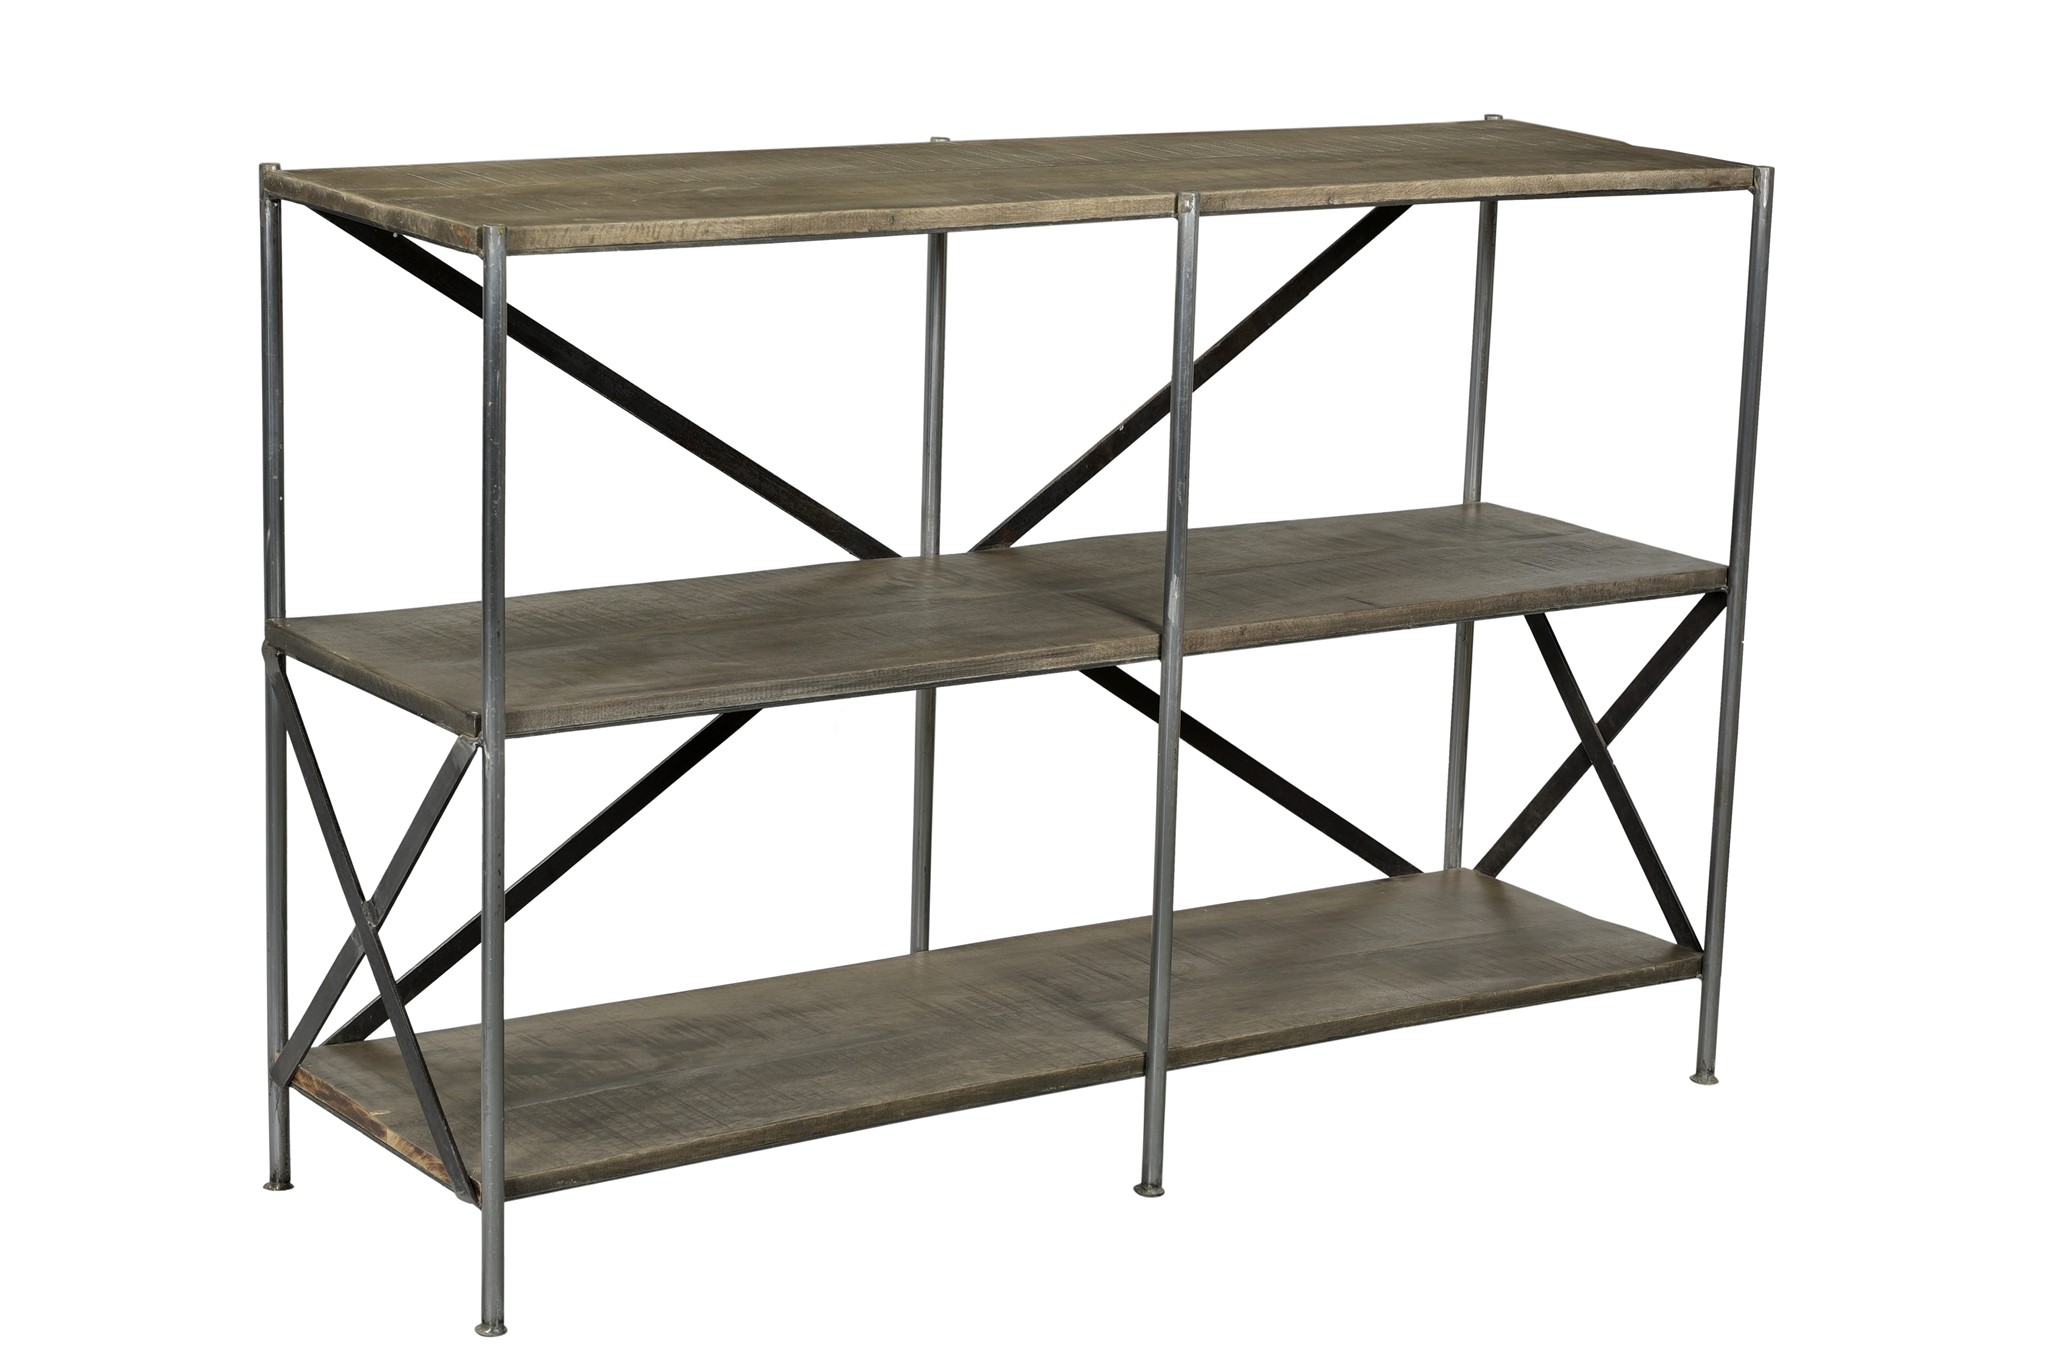 Bengal Manor Mango Wood Scraped Iron Tiered Console Table in Parkview Grey Finish